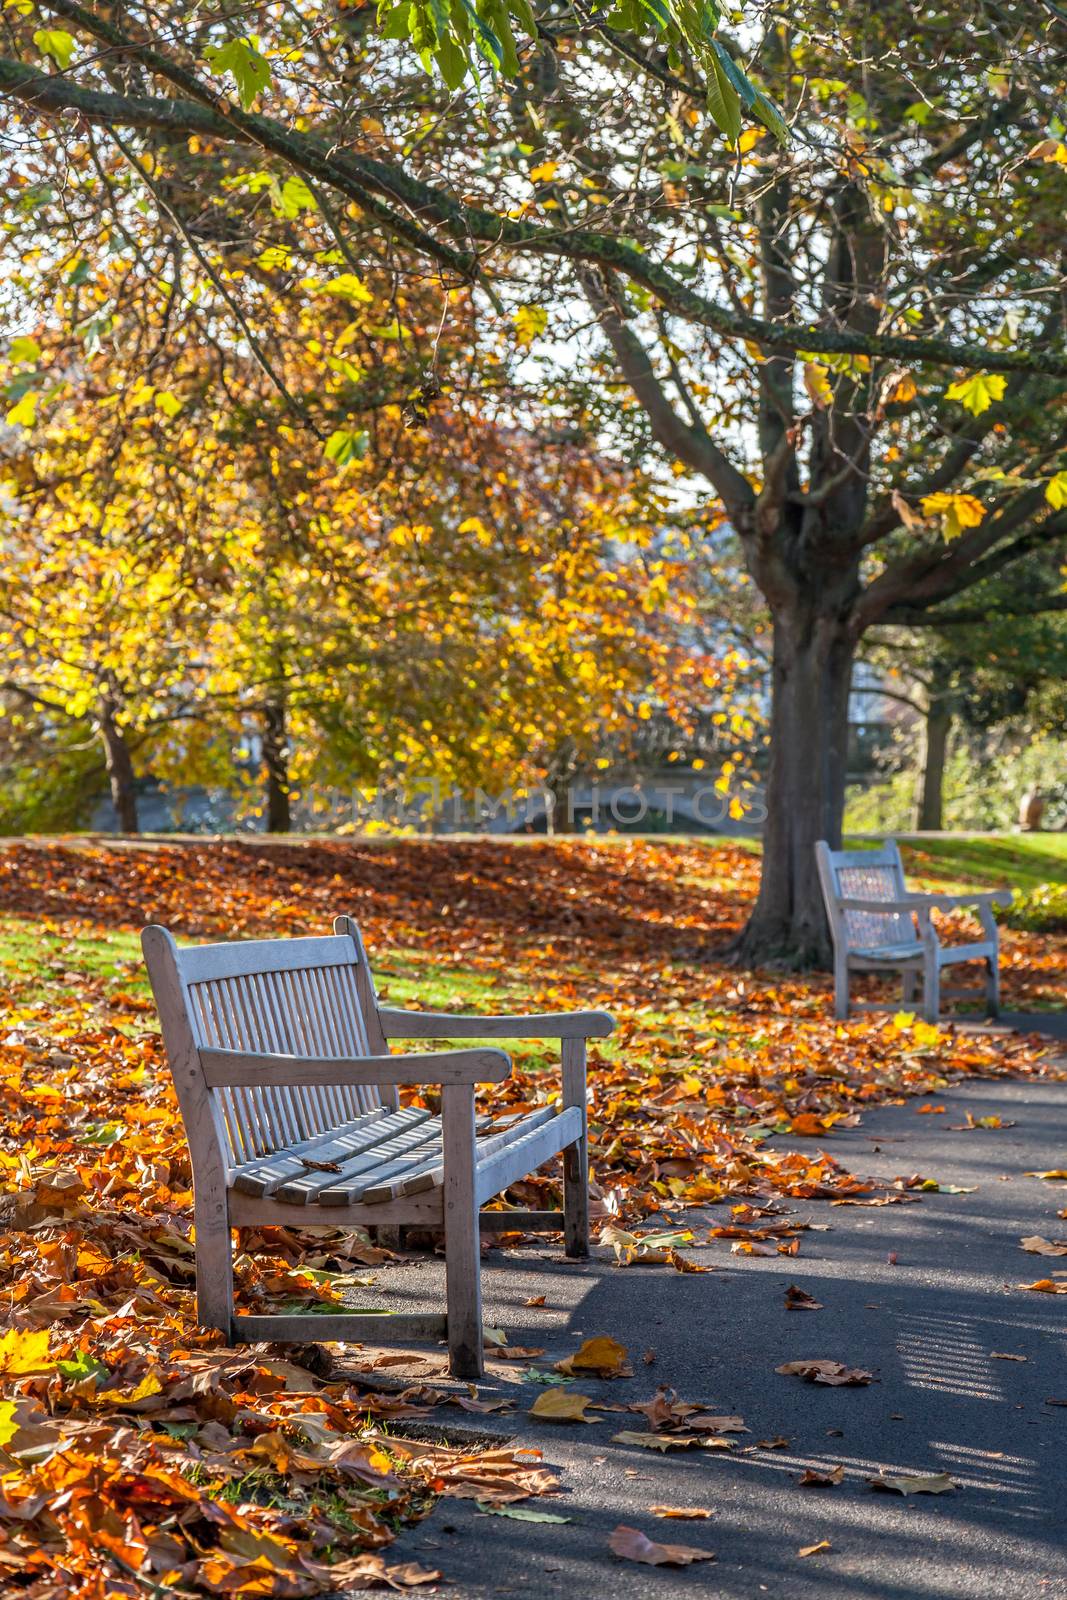 Bright photo of a bench in public garden in the autumn